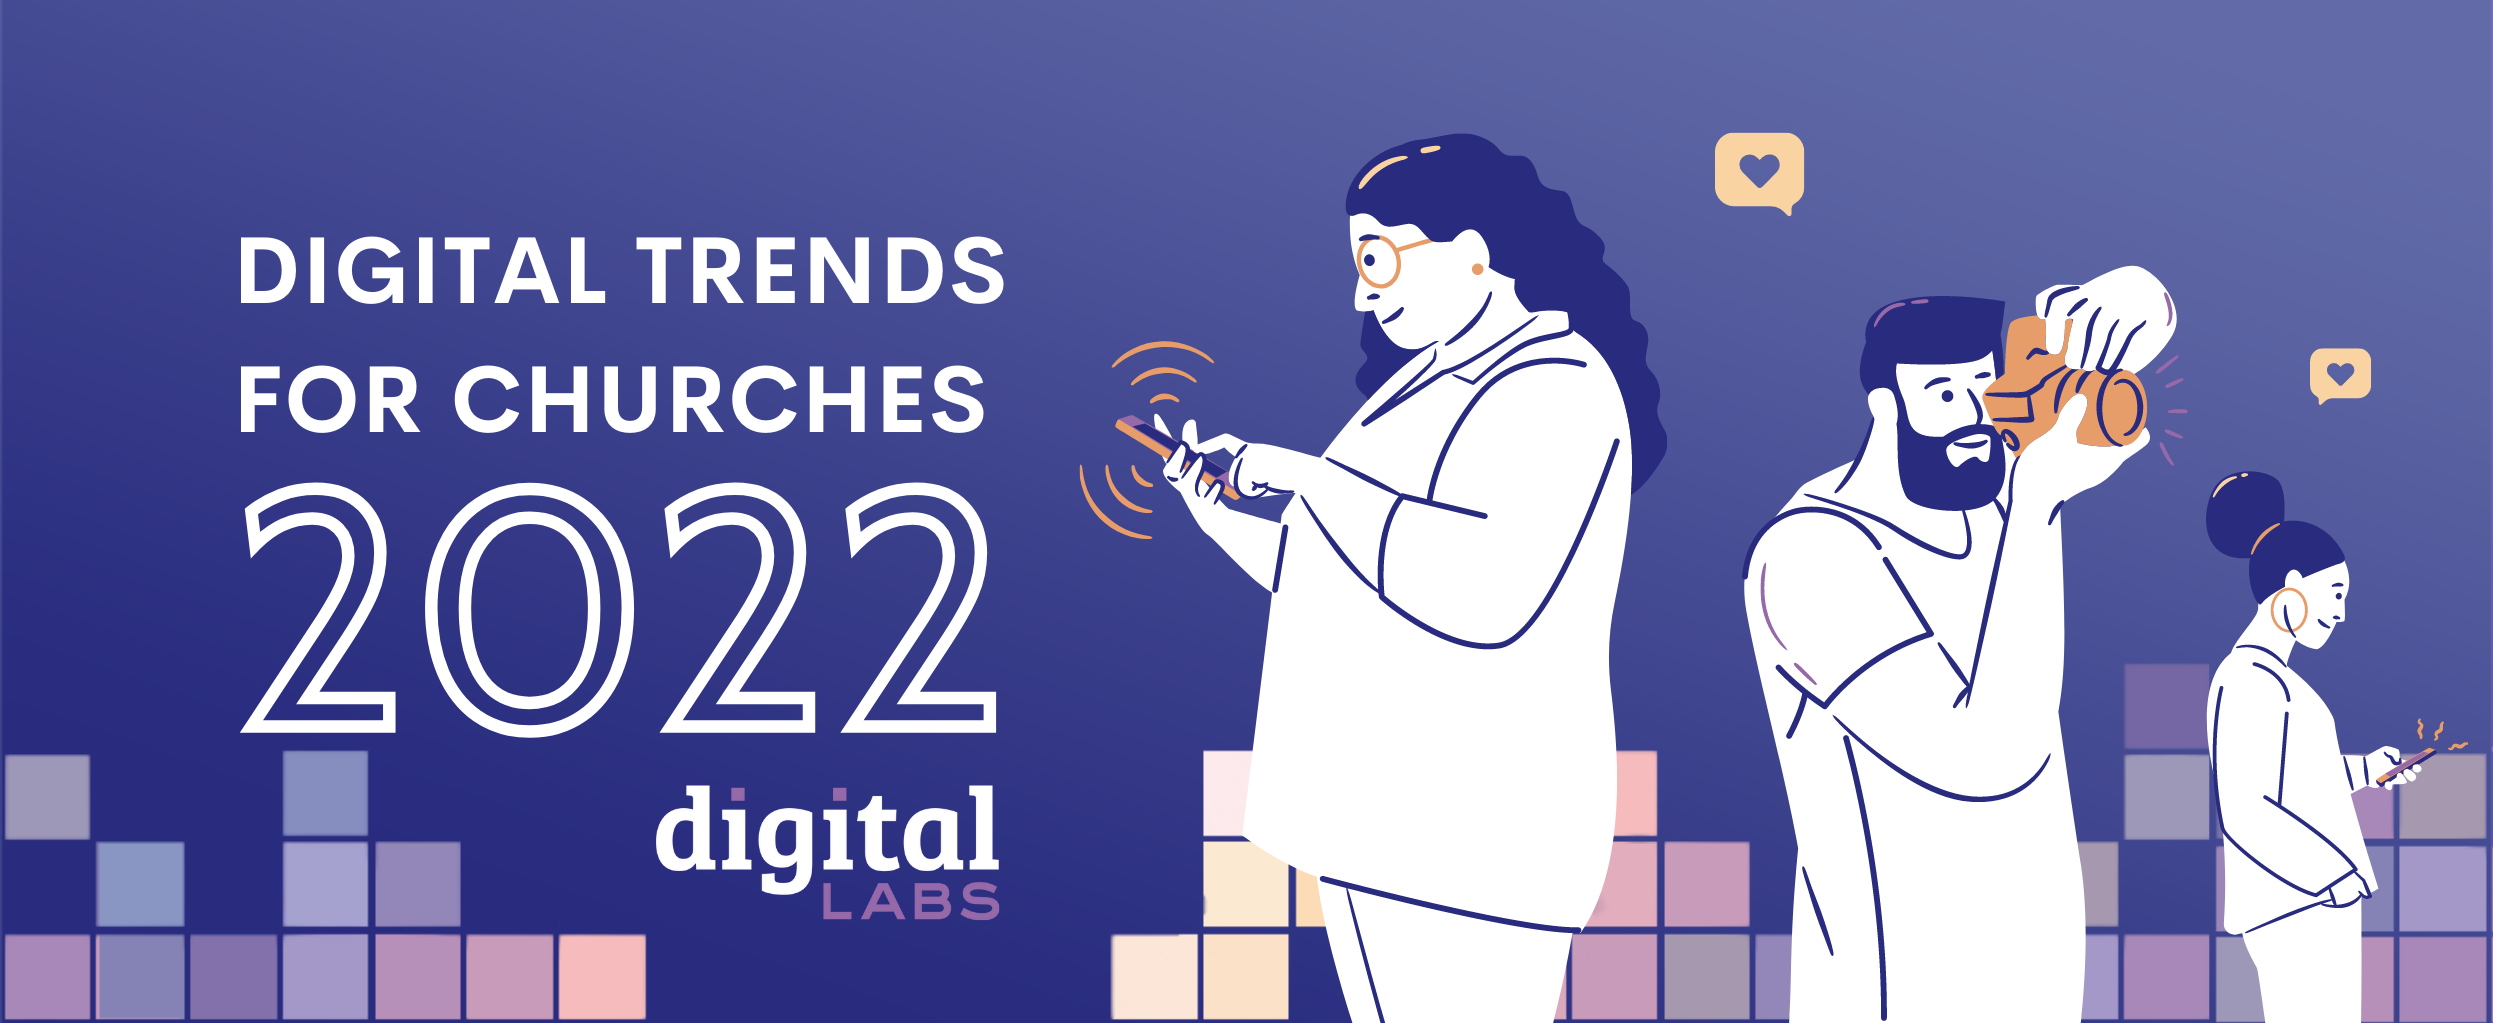 Digital trends for churches in 2022